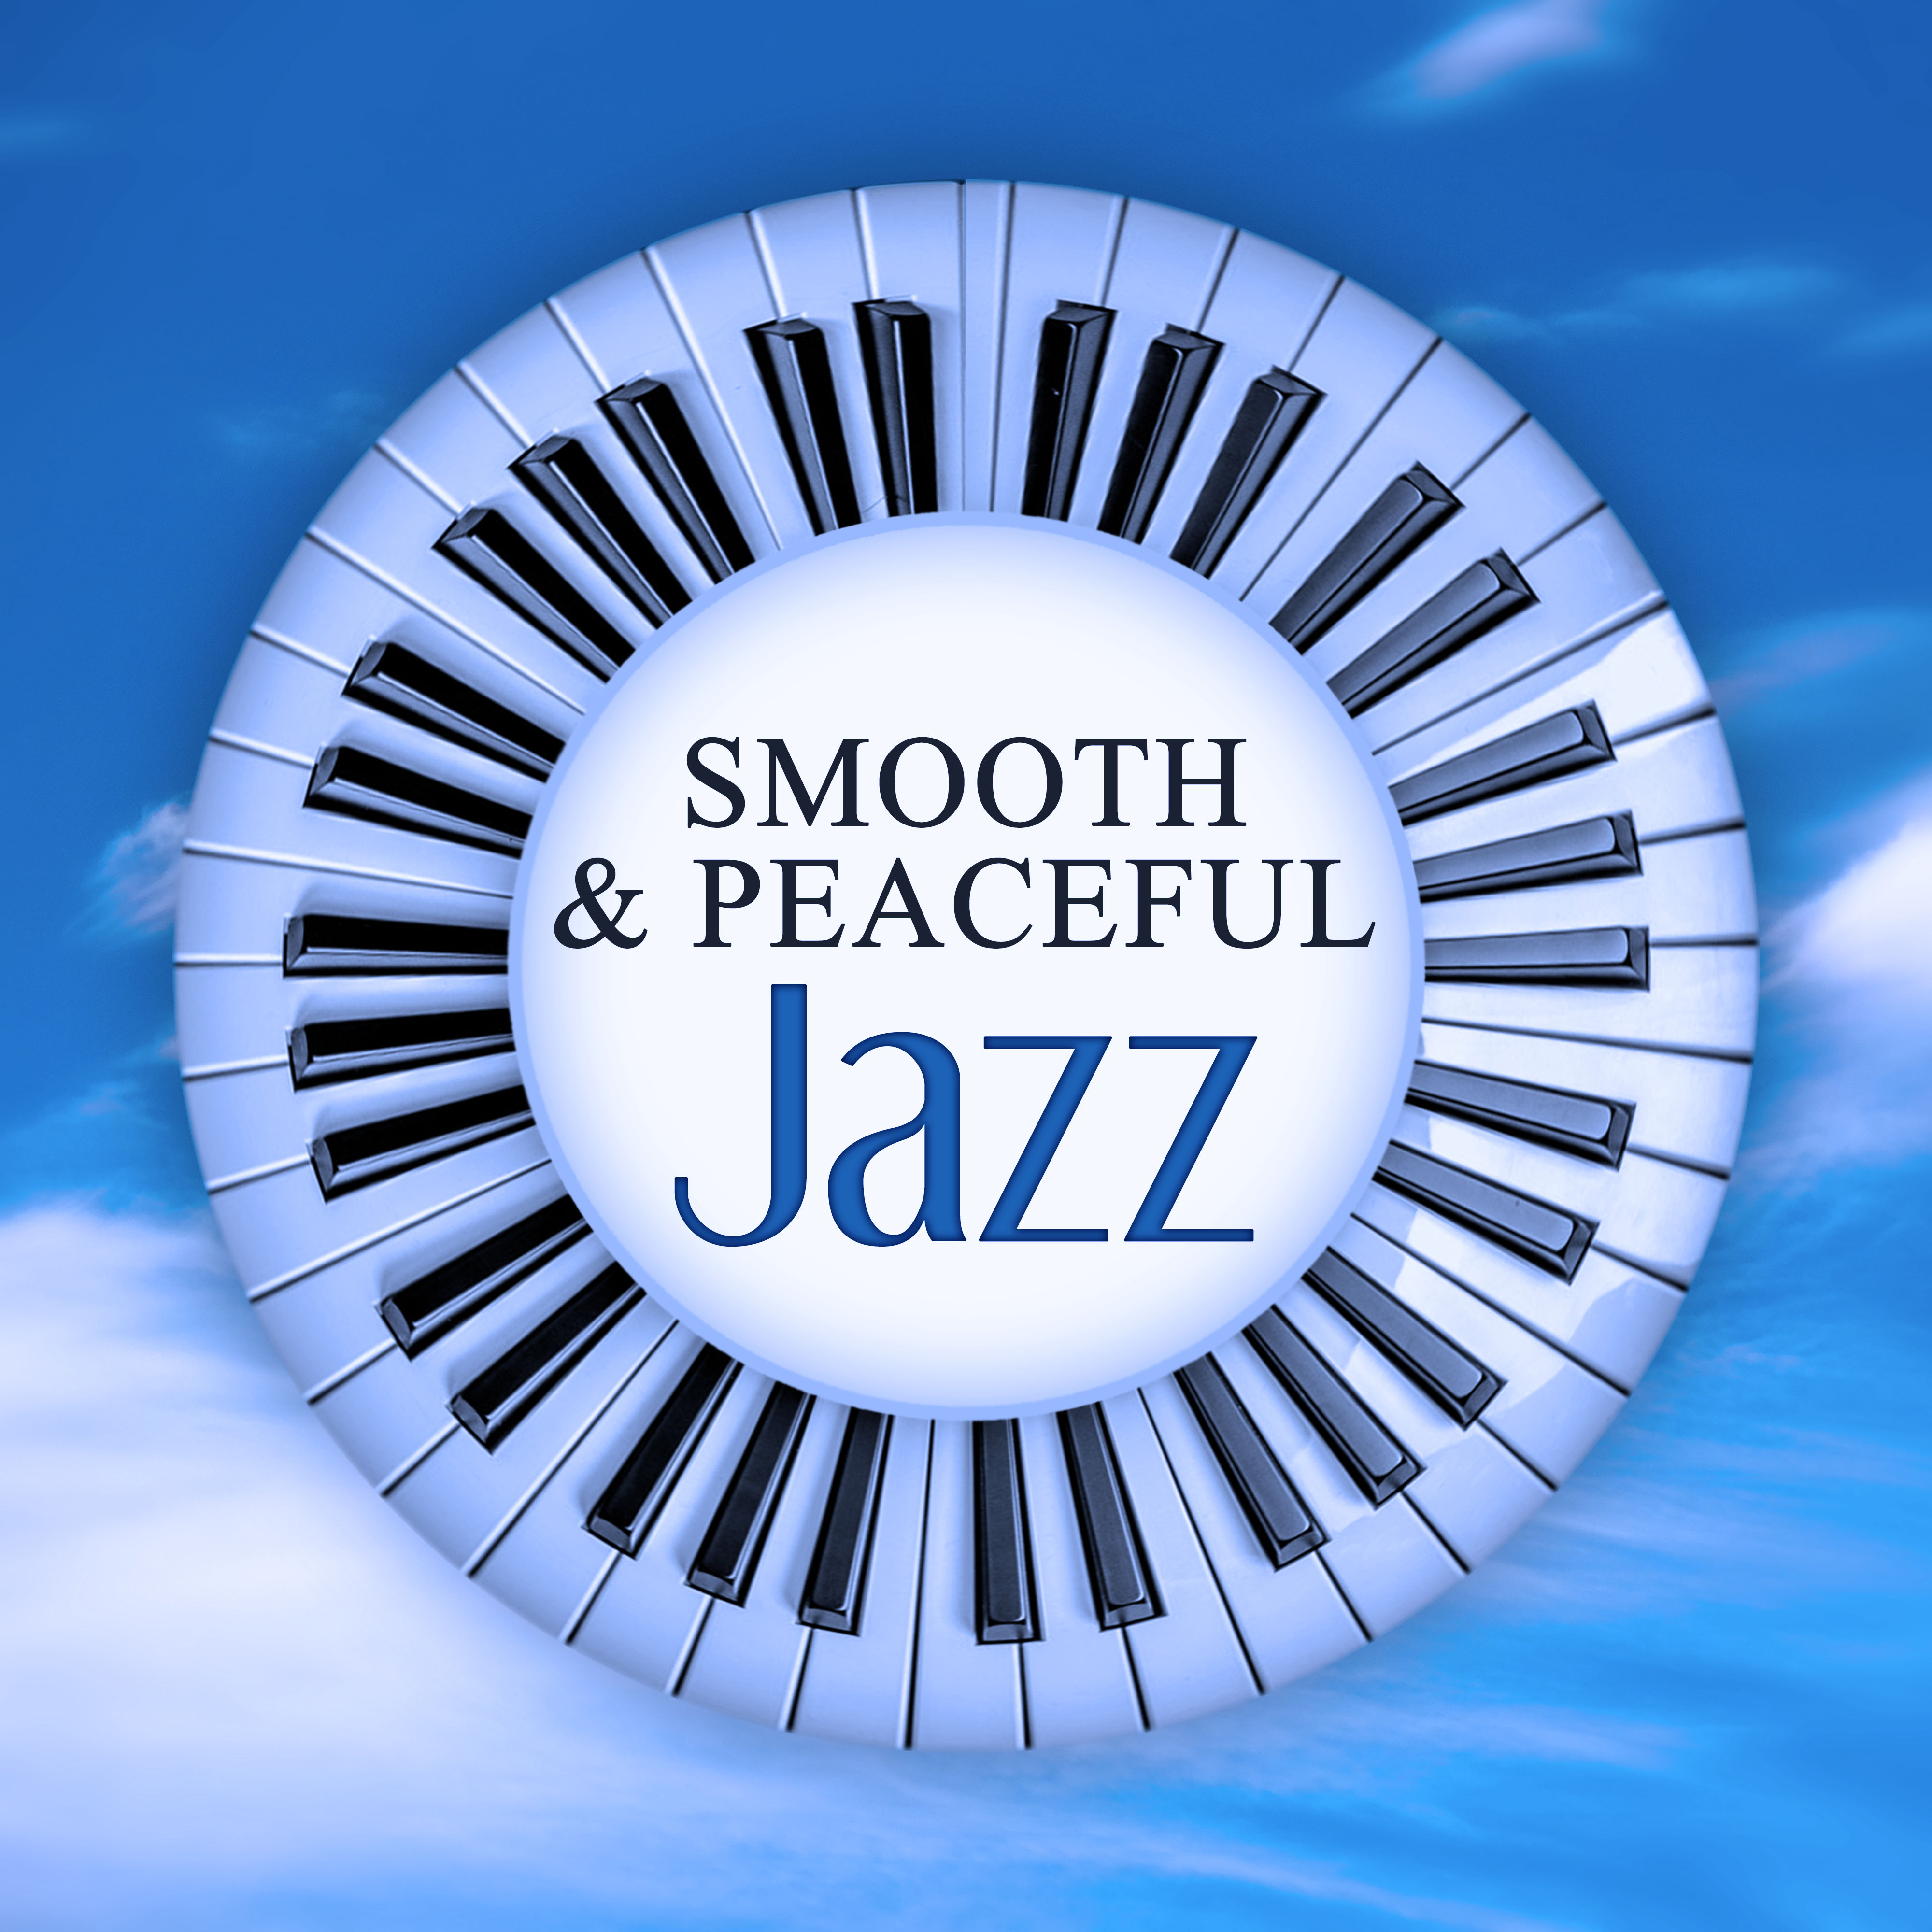 Smooth & Peaceful Jazz – Relax Yourself, Easy Listening, Best Ways to Relax, Smooth Jazz Music, Calming Sounds for Relaxation, Background Sounds